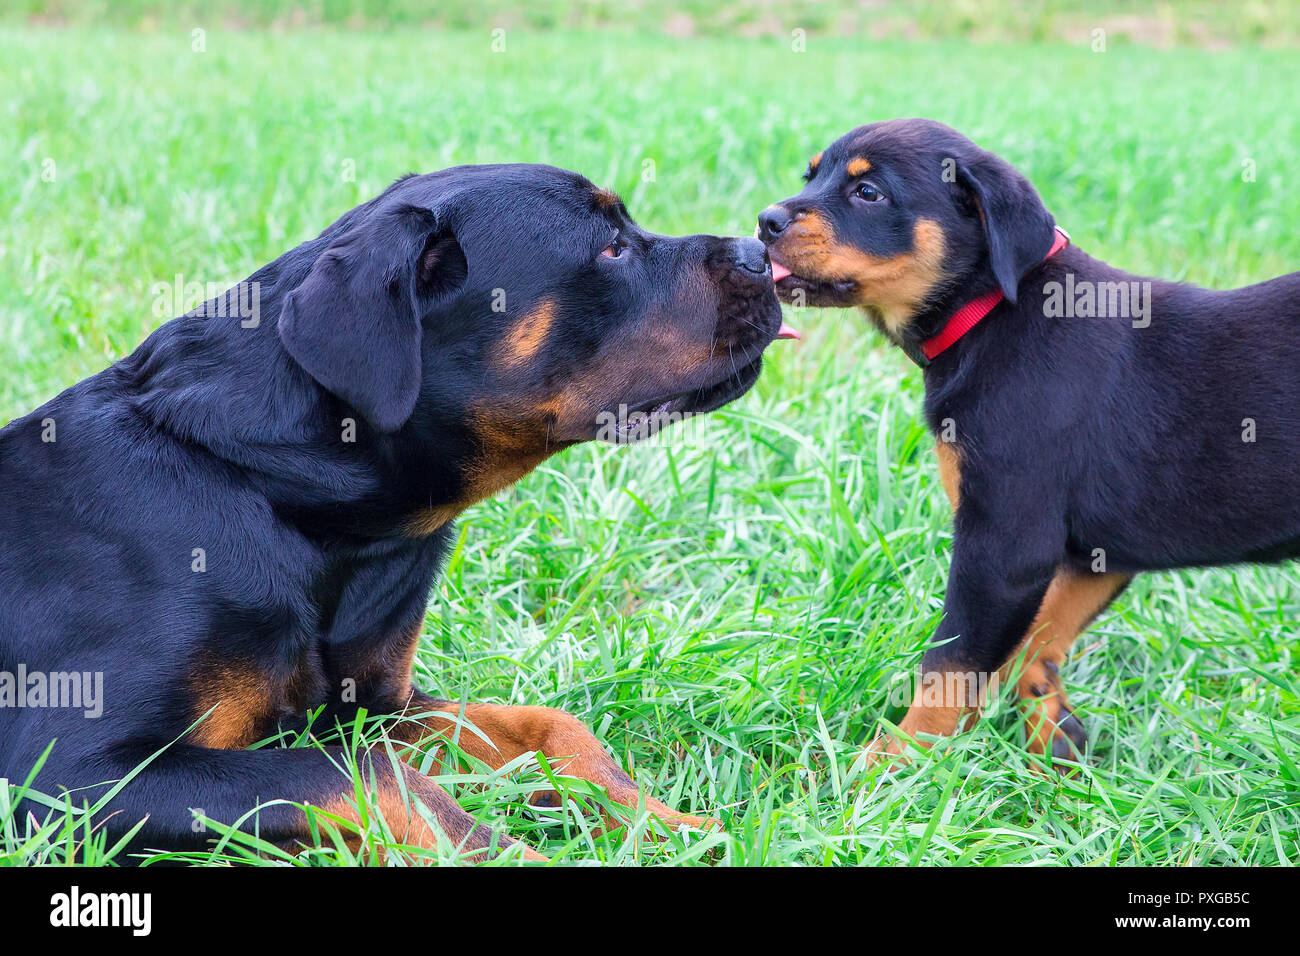 Puppy and adult rottweiler licking each other in grass Stock Photo